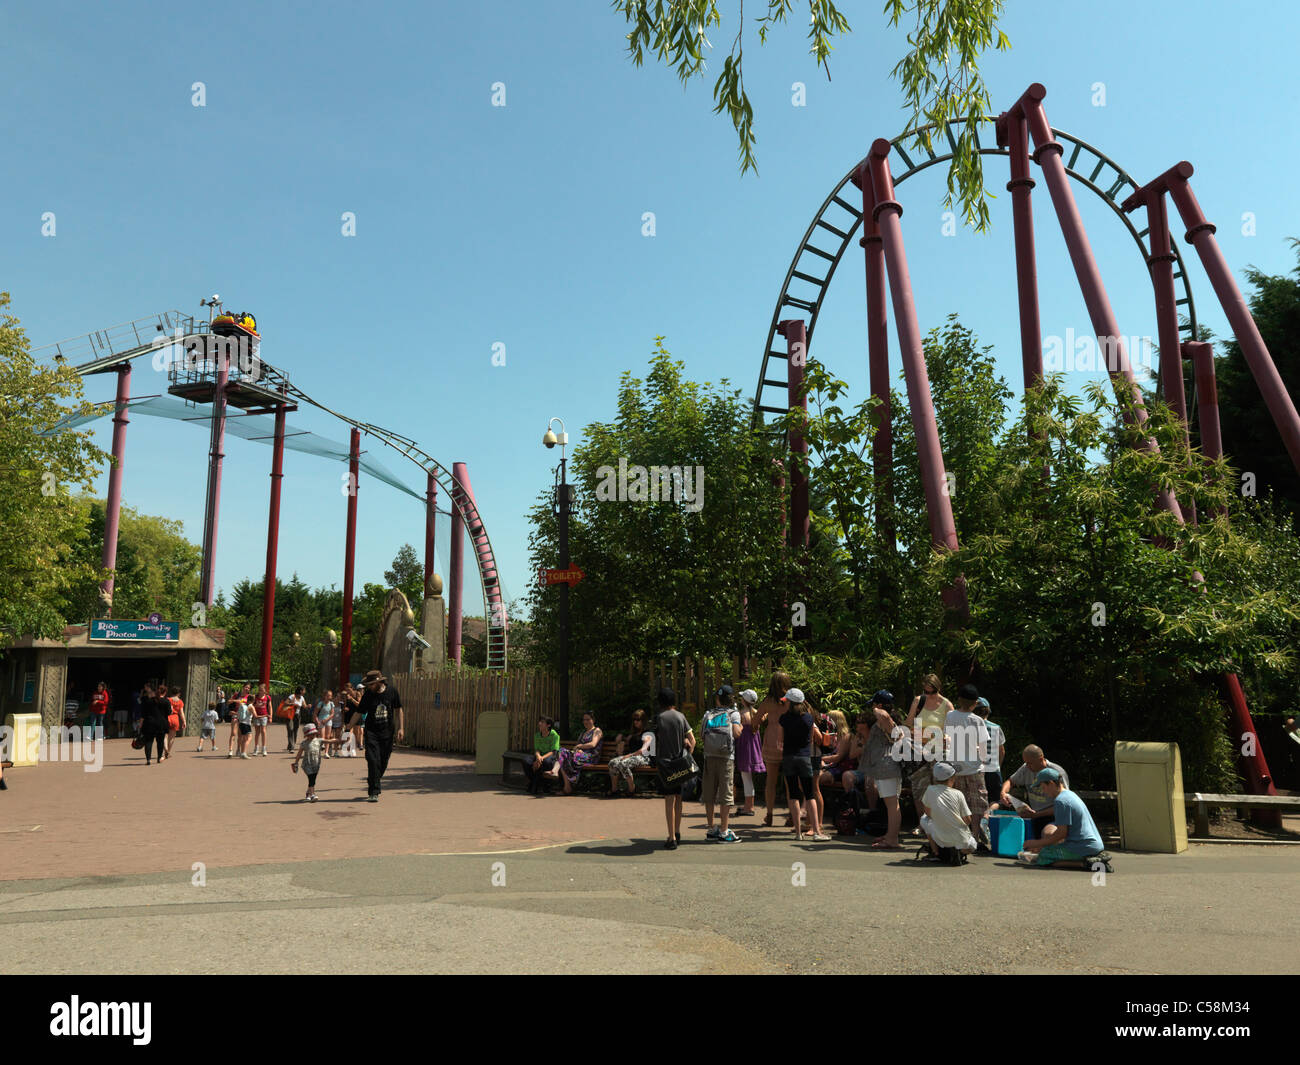 Chessington England Chessington World Of Adventures Theme Park Groups Of People By The Dragon Fury Roller Coaster Stock Photo